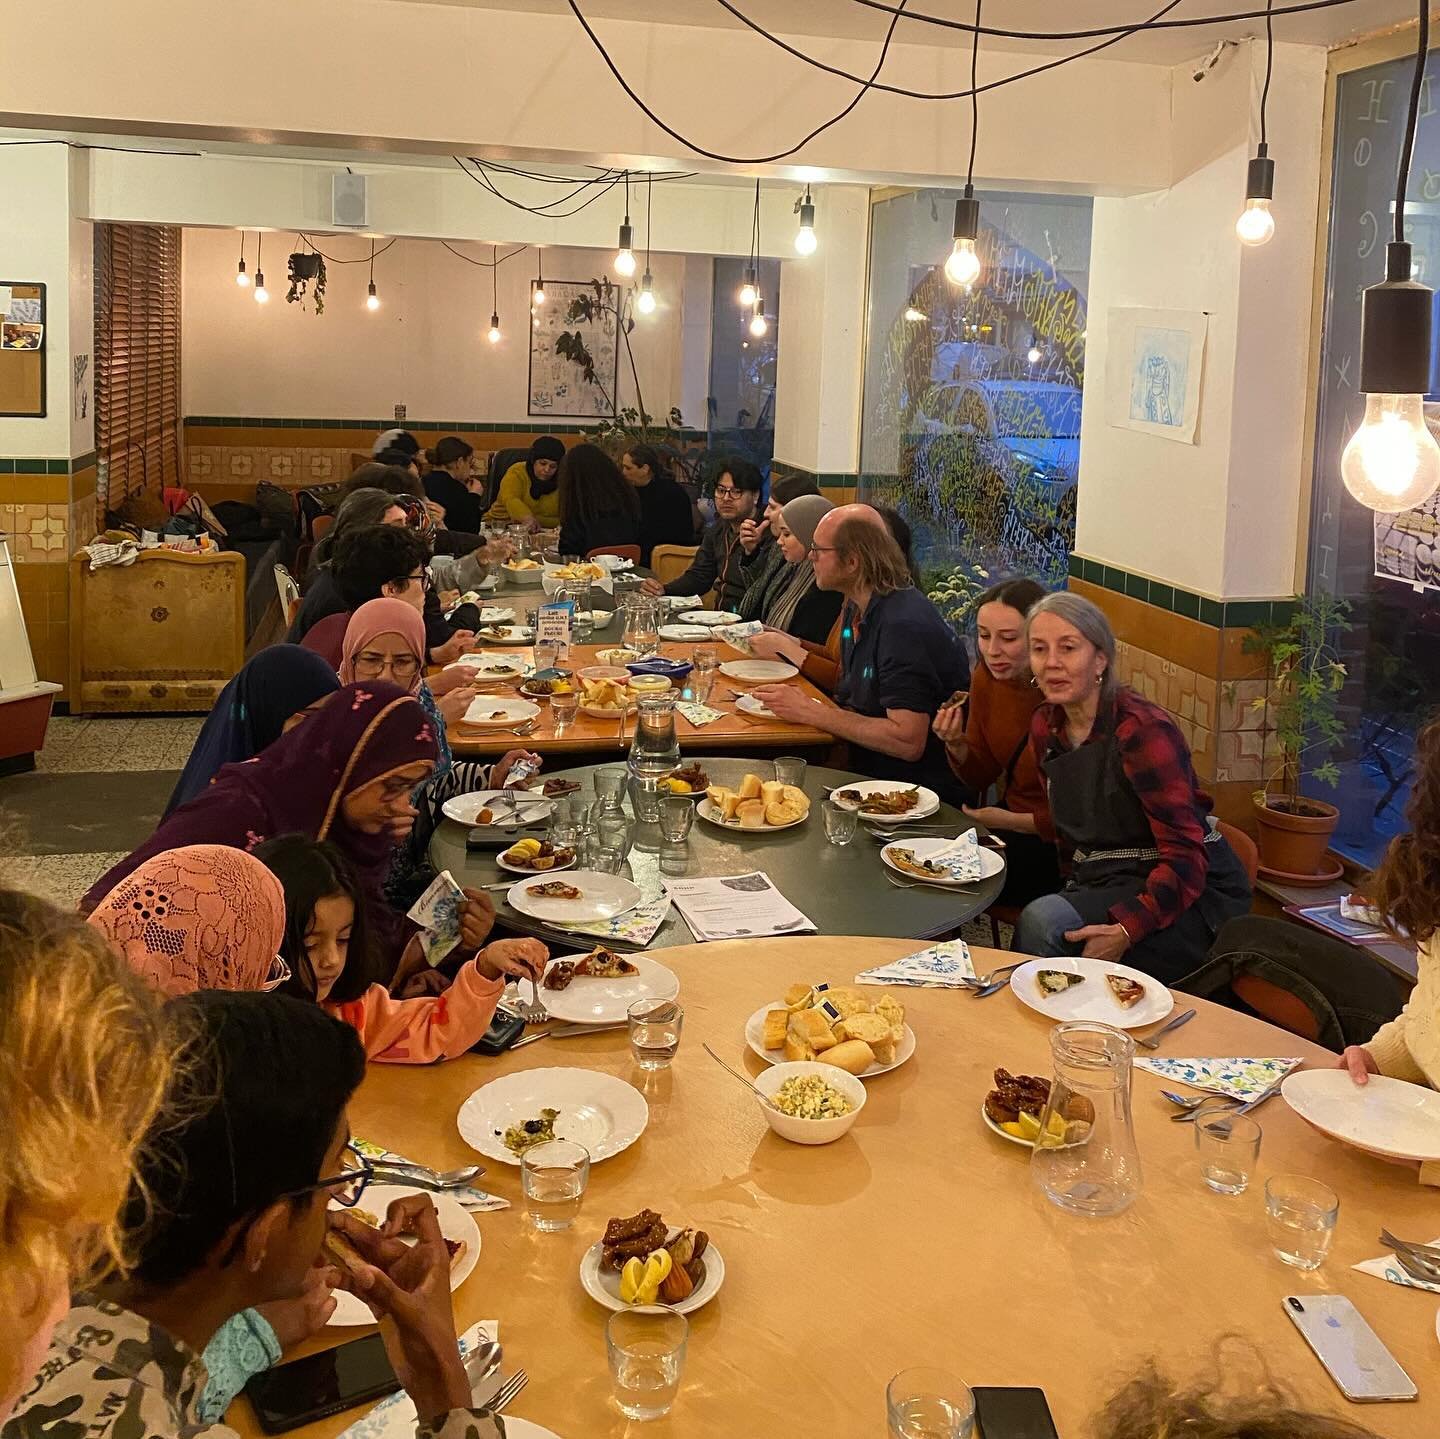 Our last preptalk iftar in Brussels. 
Here you can see in detail what we cooked 🇷🇼 🇵🇰 🇲🇦 

#iftar #veggieiftar #preptalk #brussels